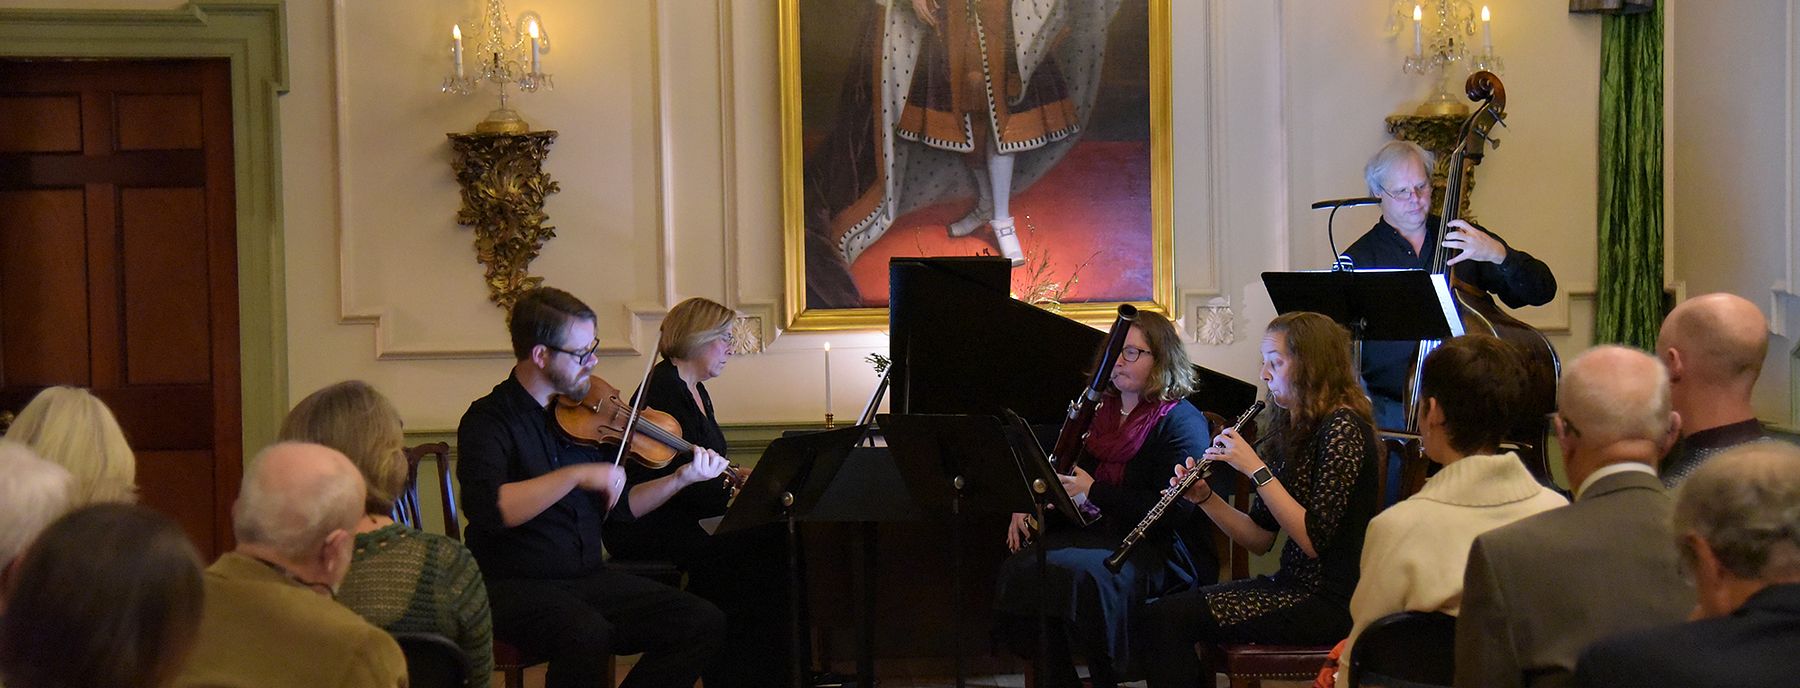 Chamber music by candlelight